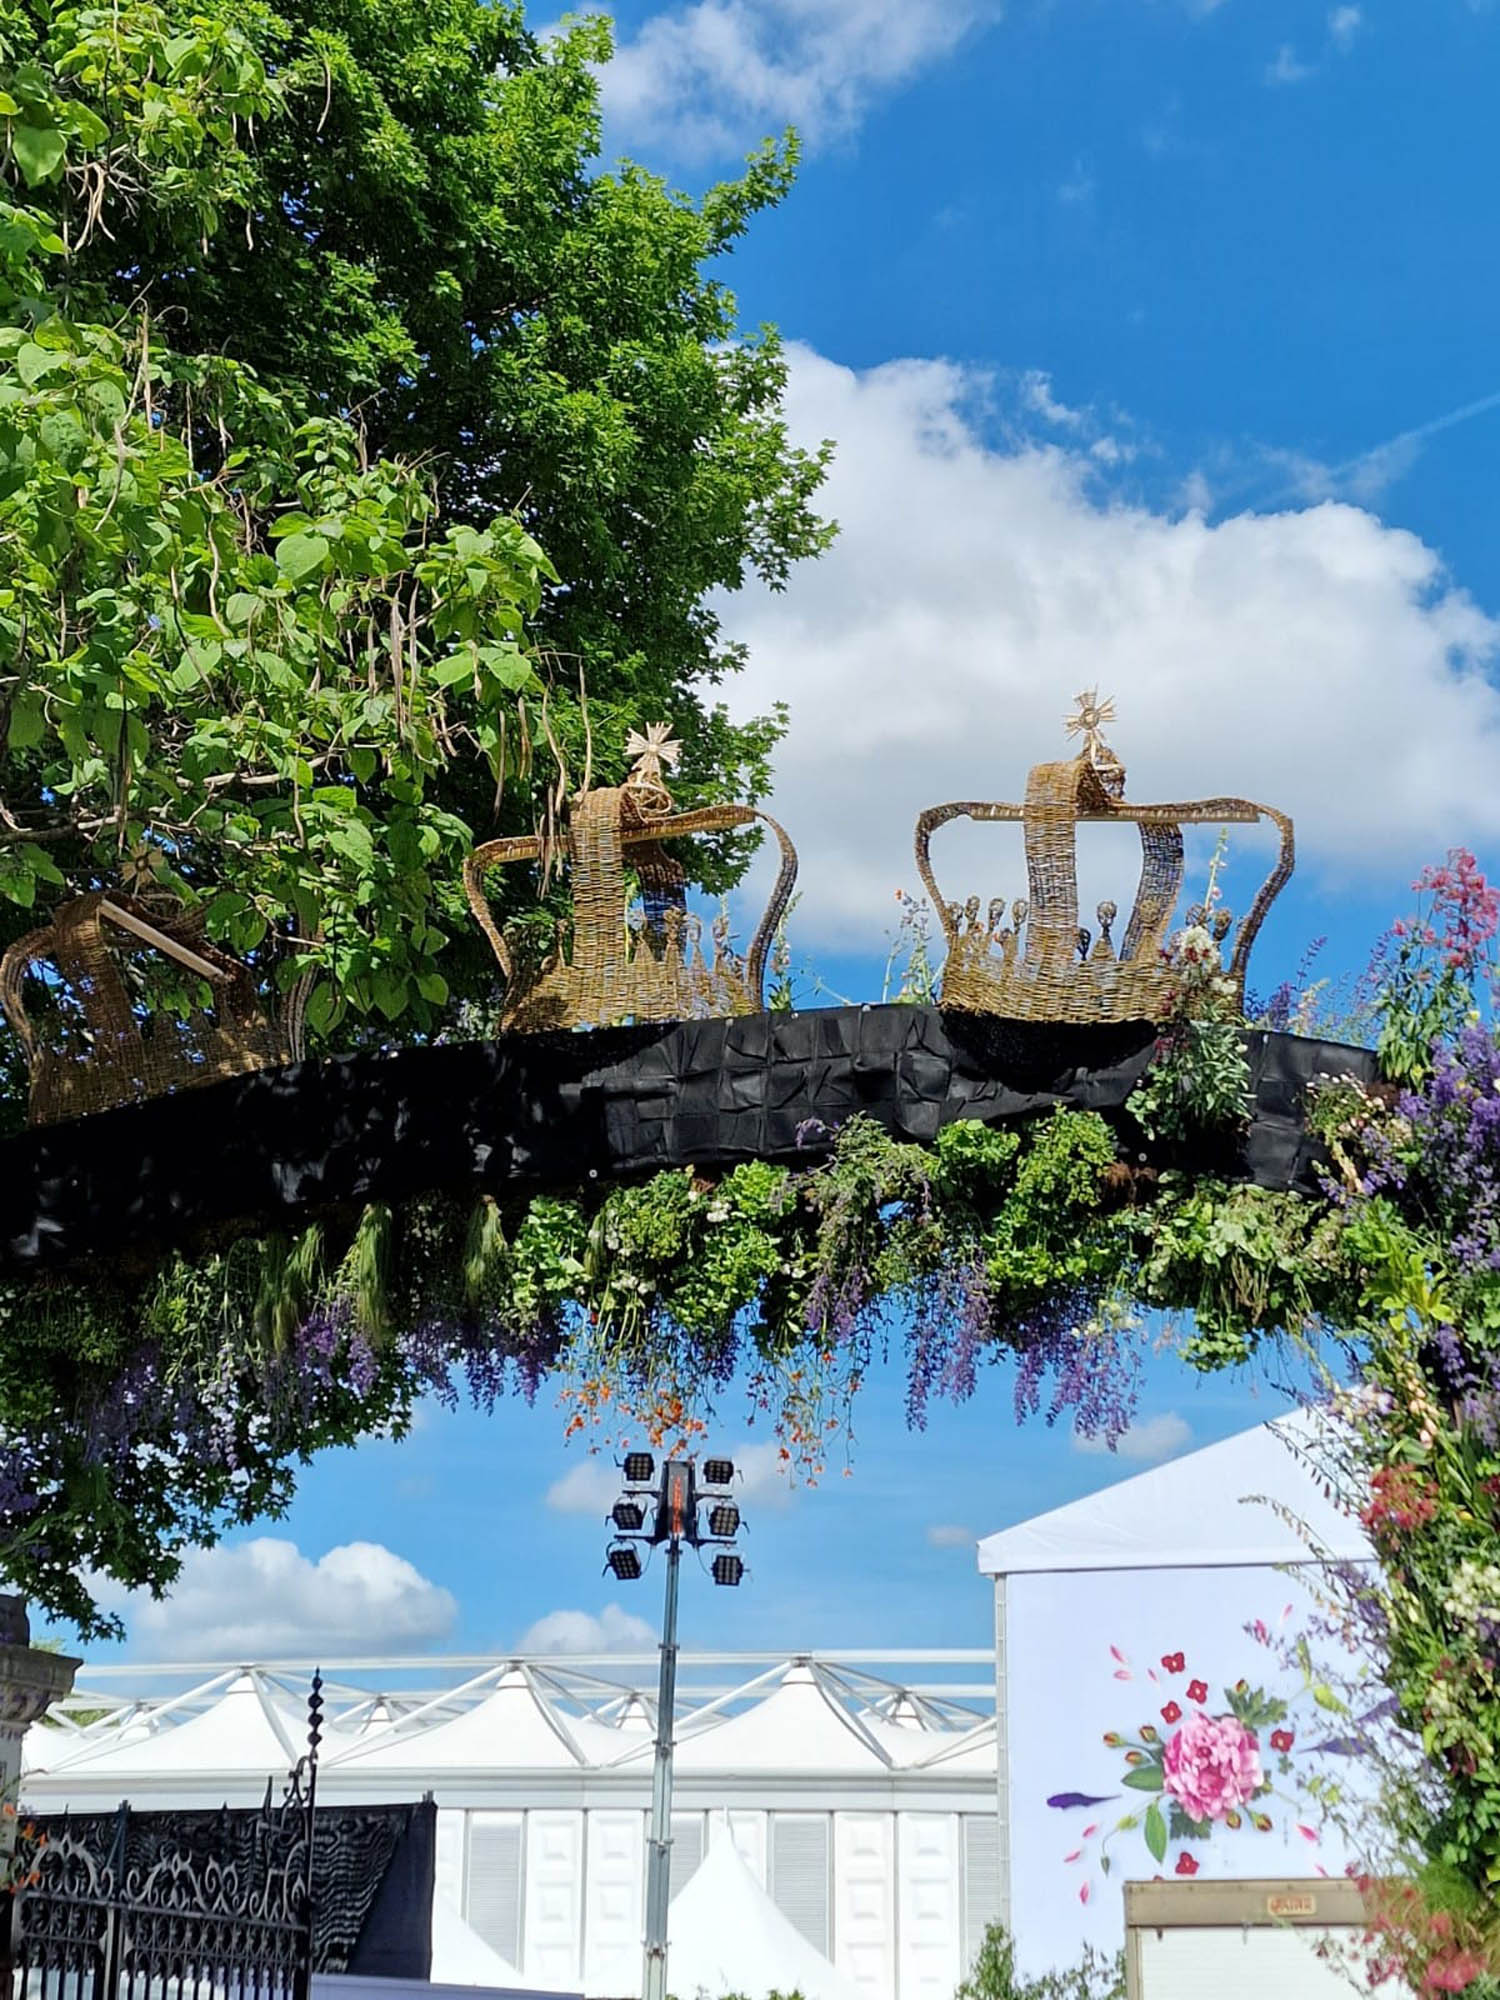 Queens gate at chelsea flower show 2022 is huge living floral arch with foliage and flowers and wicker crowns decorating the top as part of the jubilee celebrations in the gardens